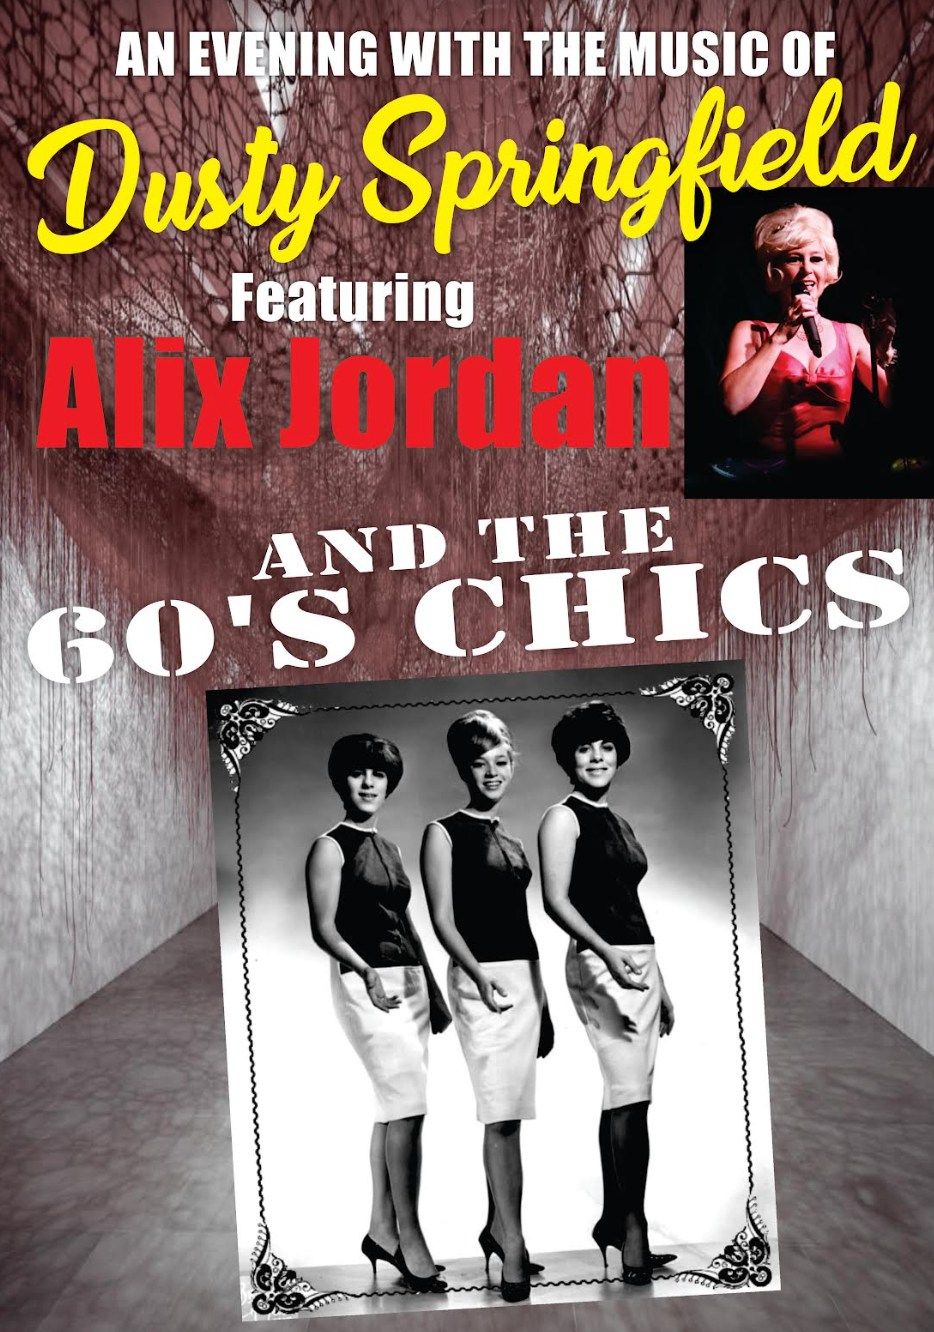 An Evening with the music of Dusty Springfield + 60's Chics